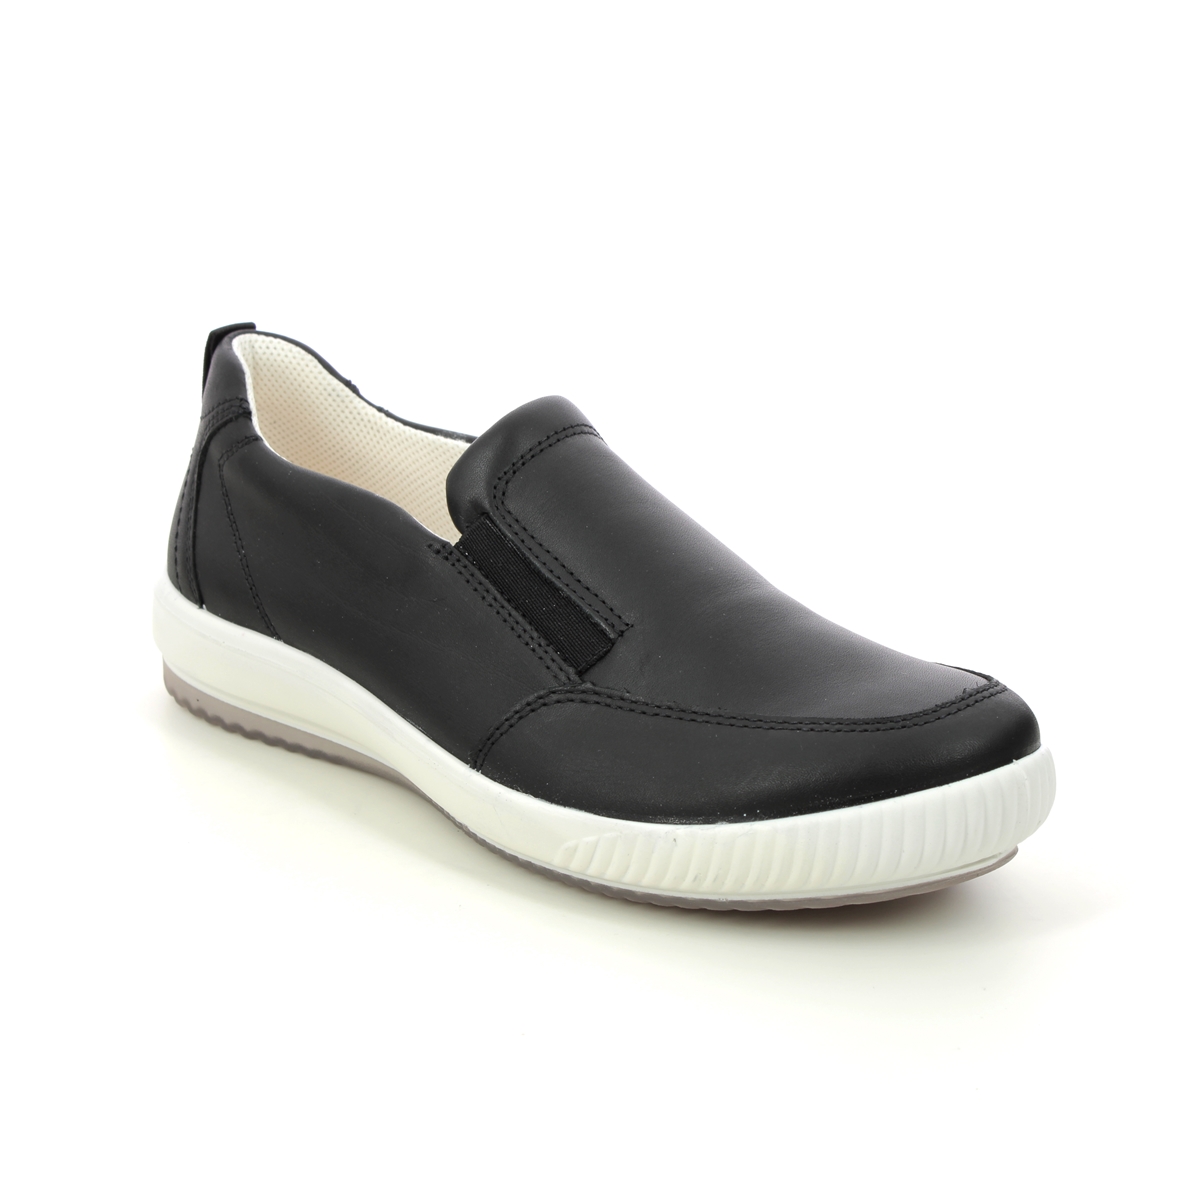 Legero Tanaro 5 Slip Black leather Womens Comfort Slip On Shoes 2000215-0100 in a Plain Leather in Size 7